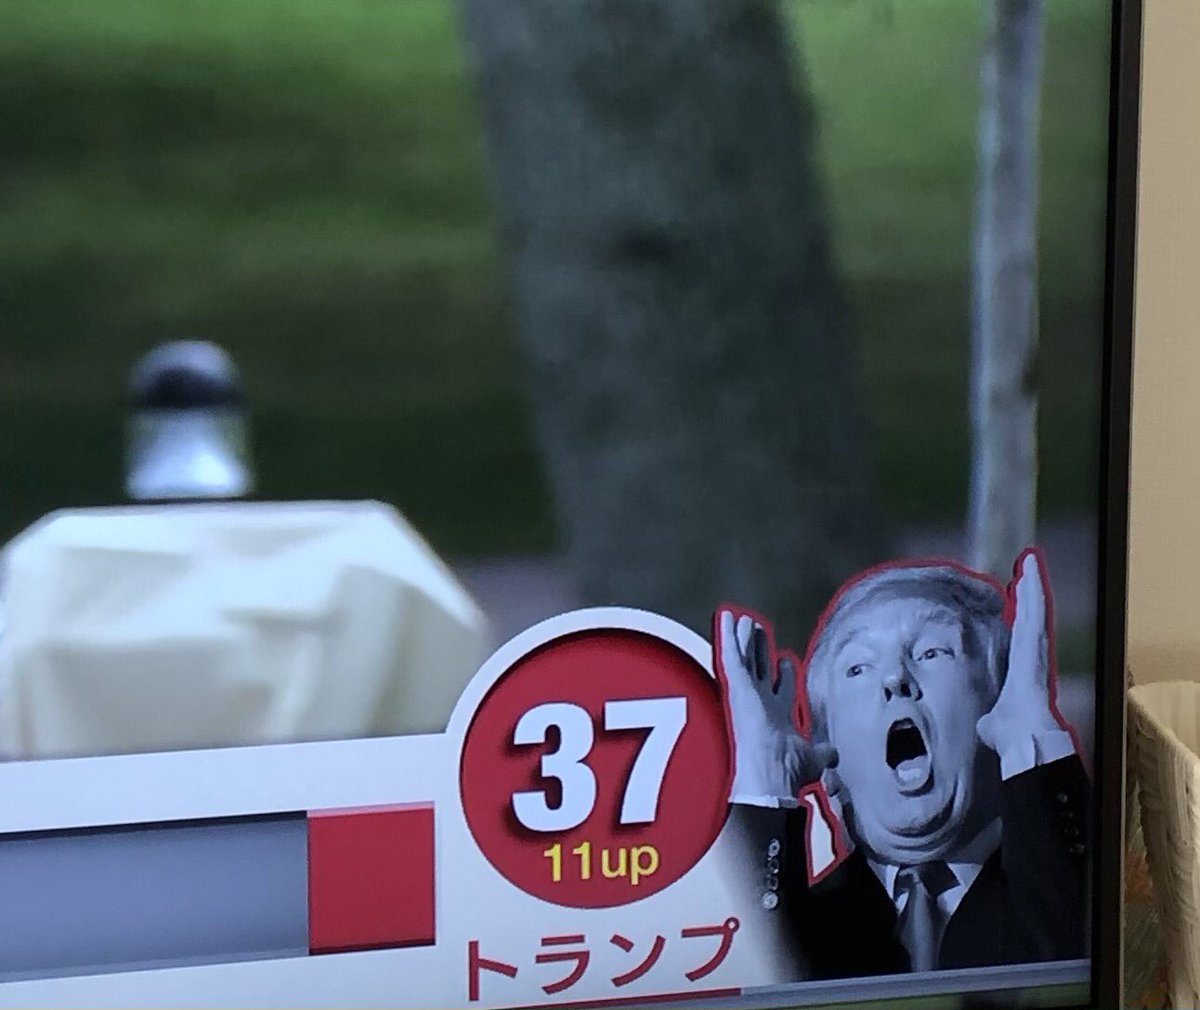 Asahi TV reporting new electoral votes for Trump with graphic accompaniment